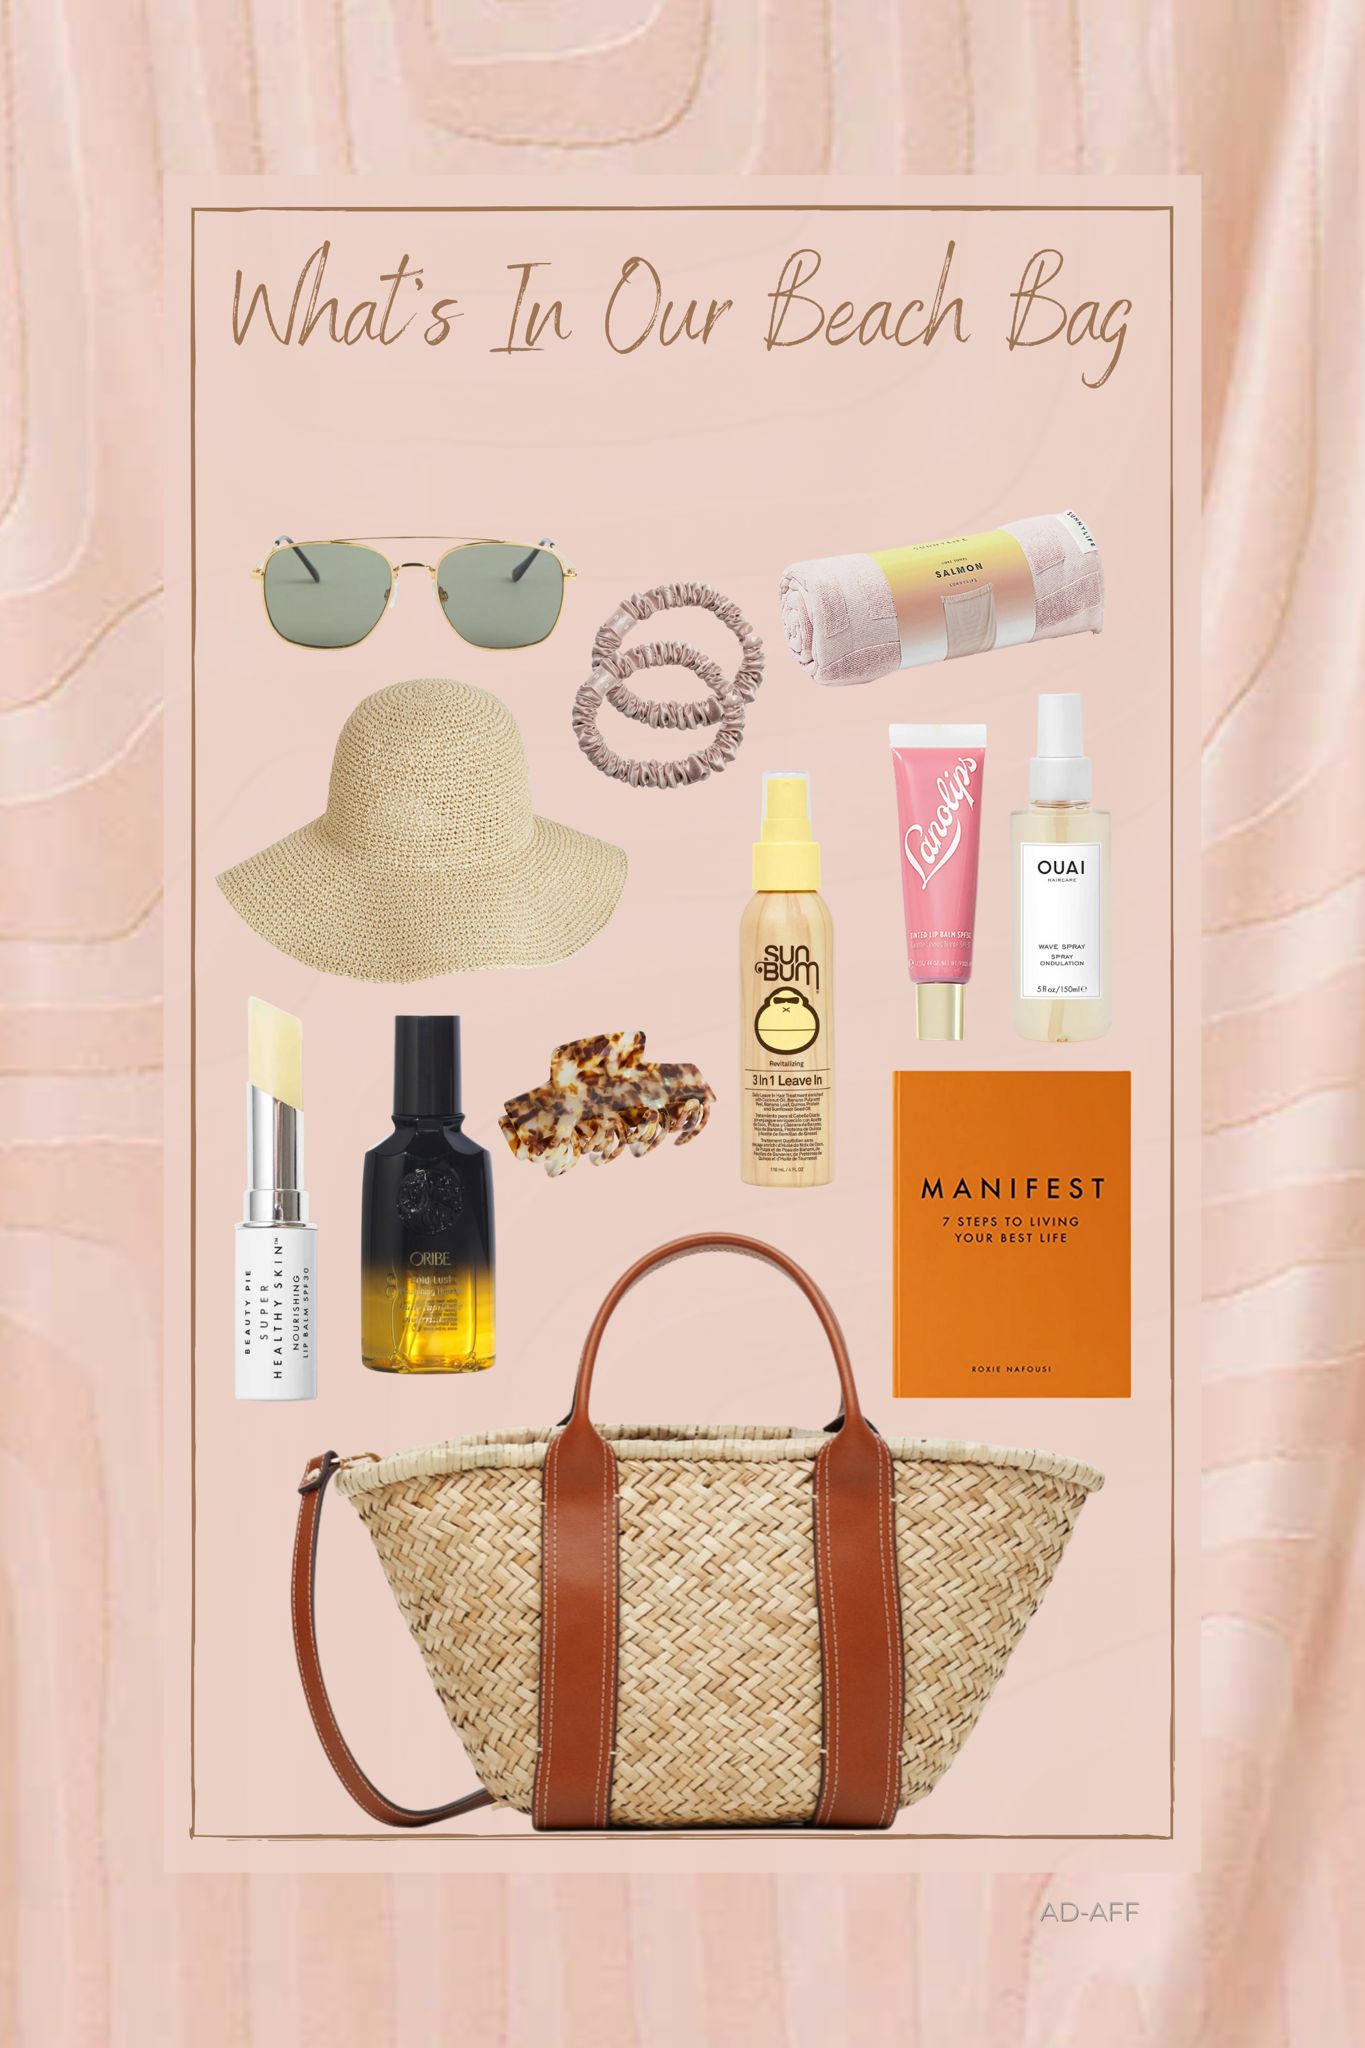 WHAT’S IN OUR BEACH BAGS